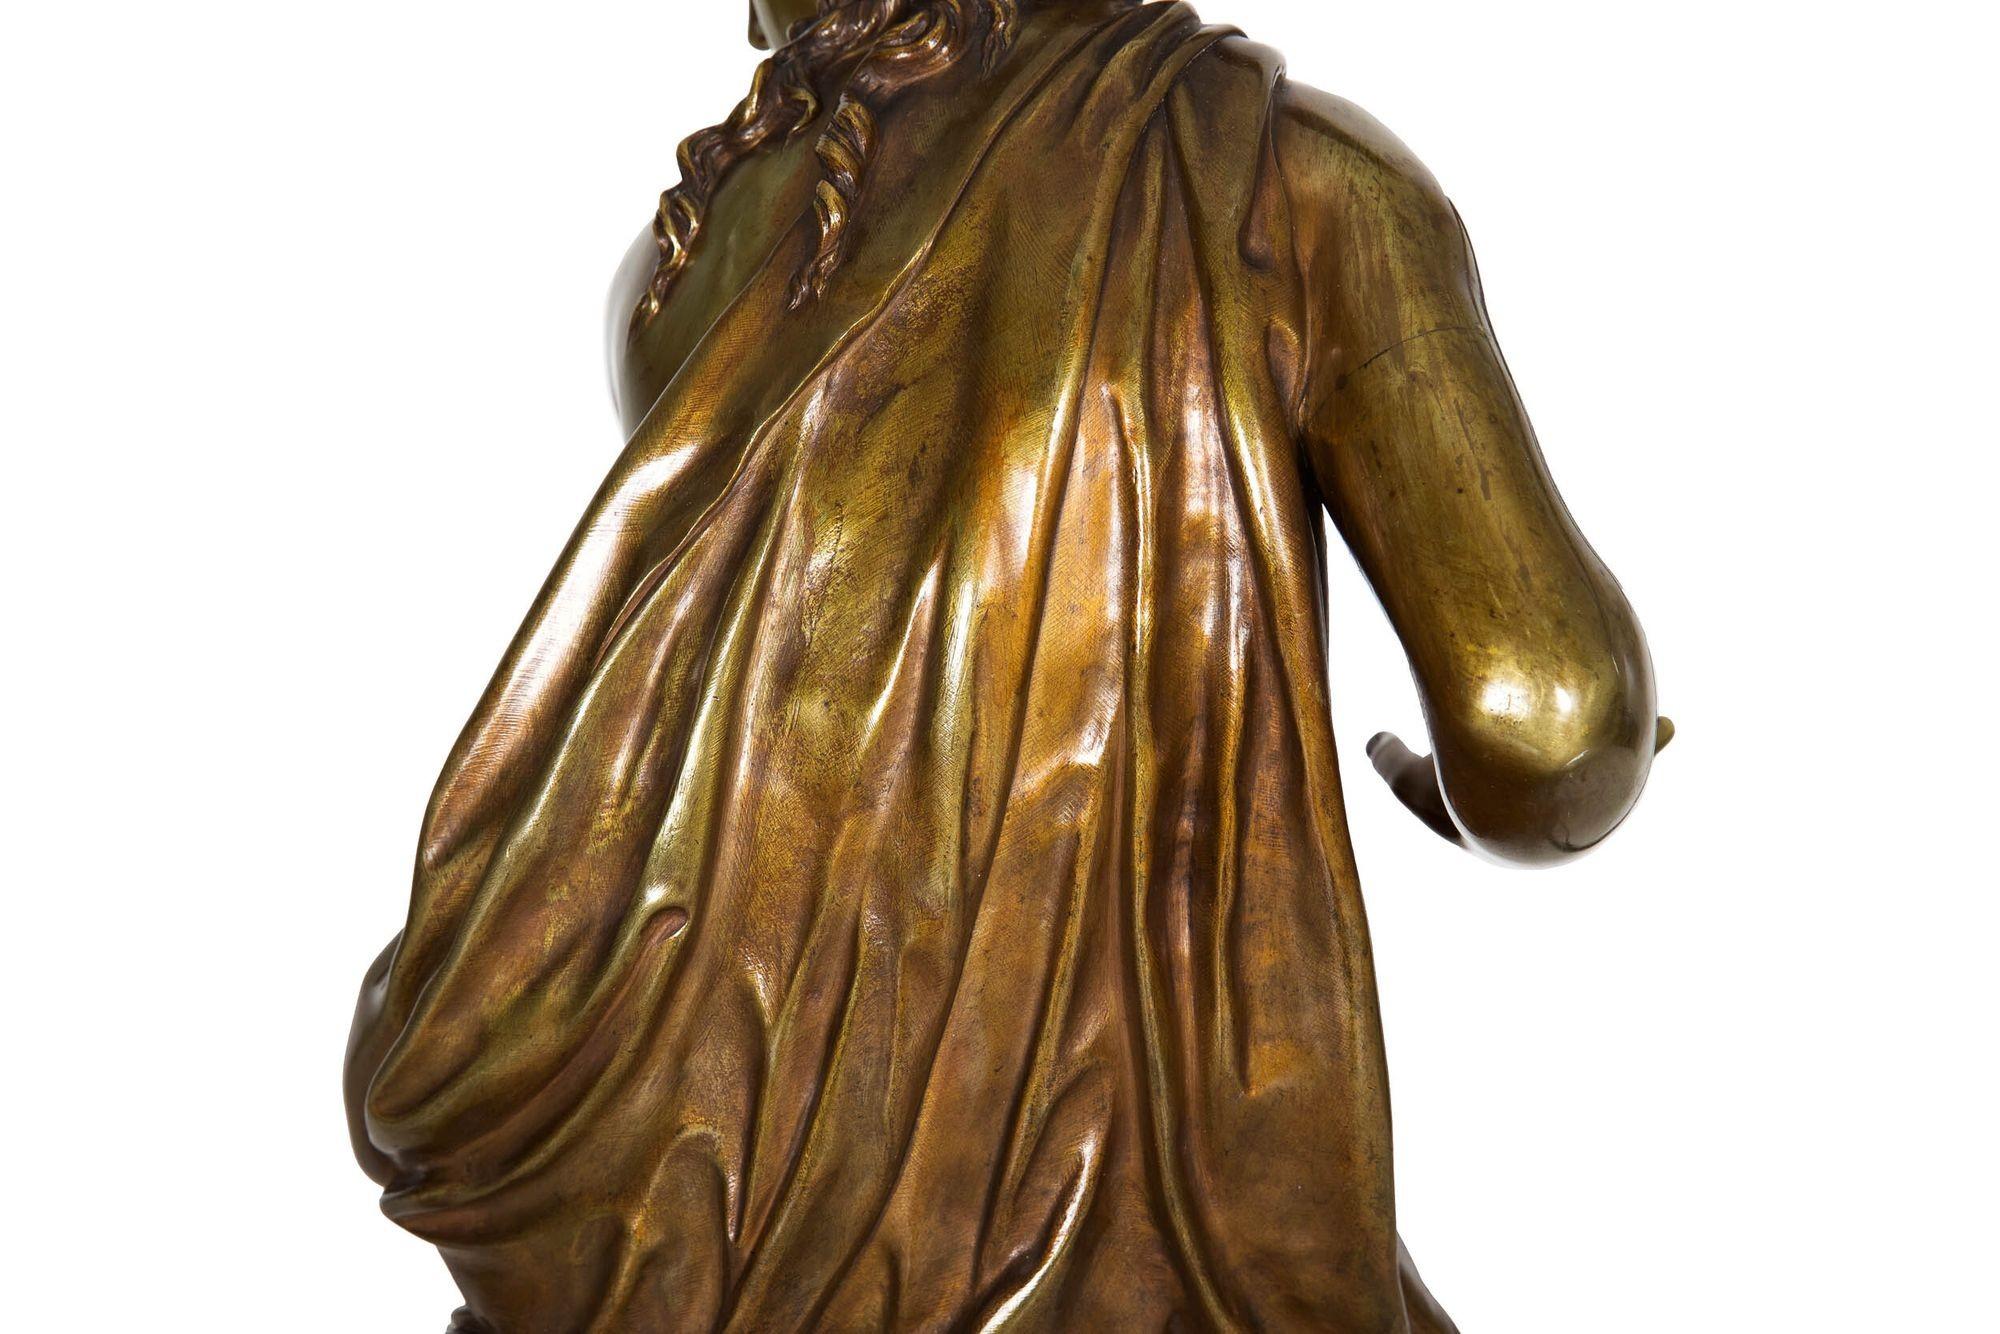 French Antique Bronze Sculpture “Seated Woman” by Etienne-Henri Dumaige, c.1880 For Sale 14